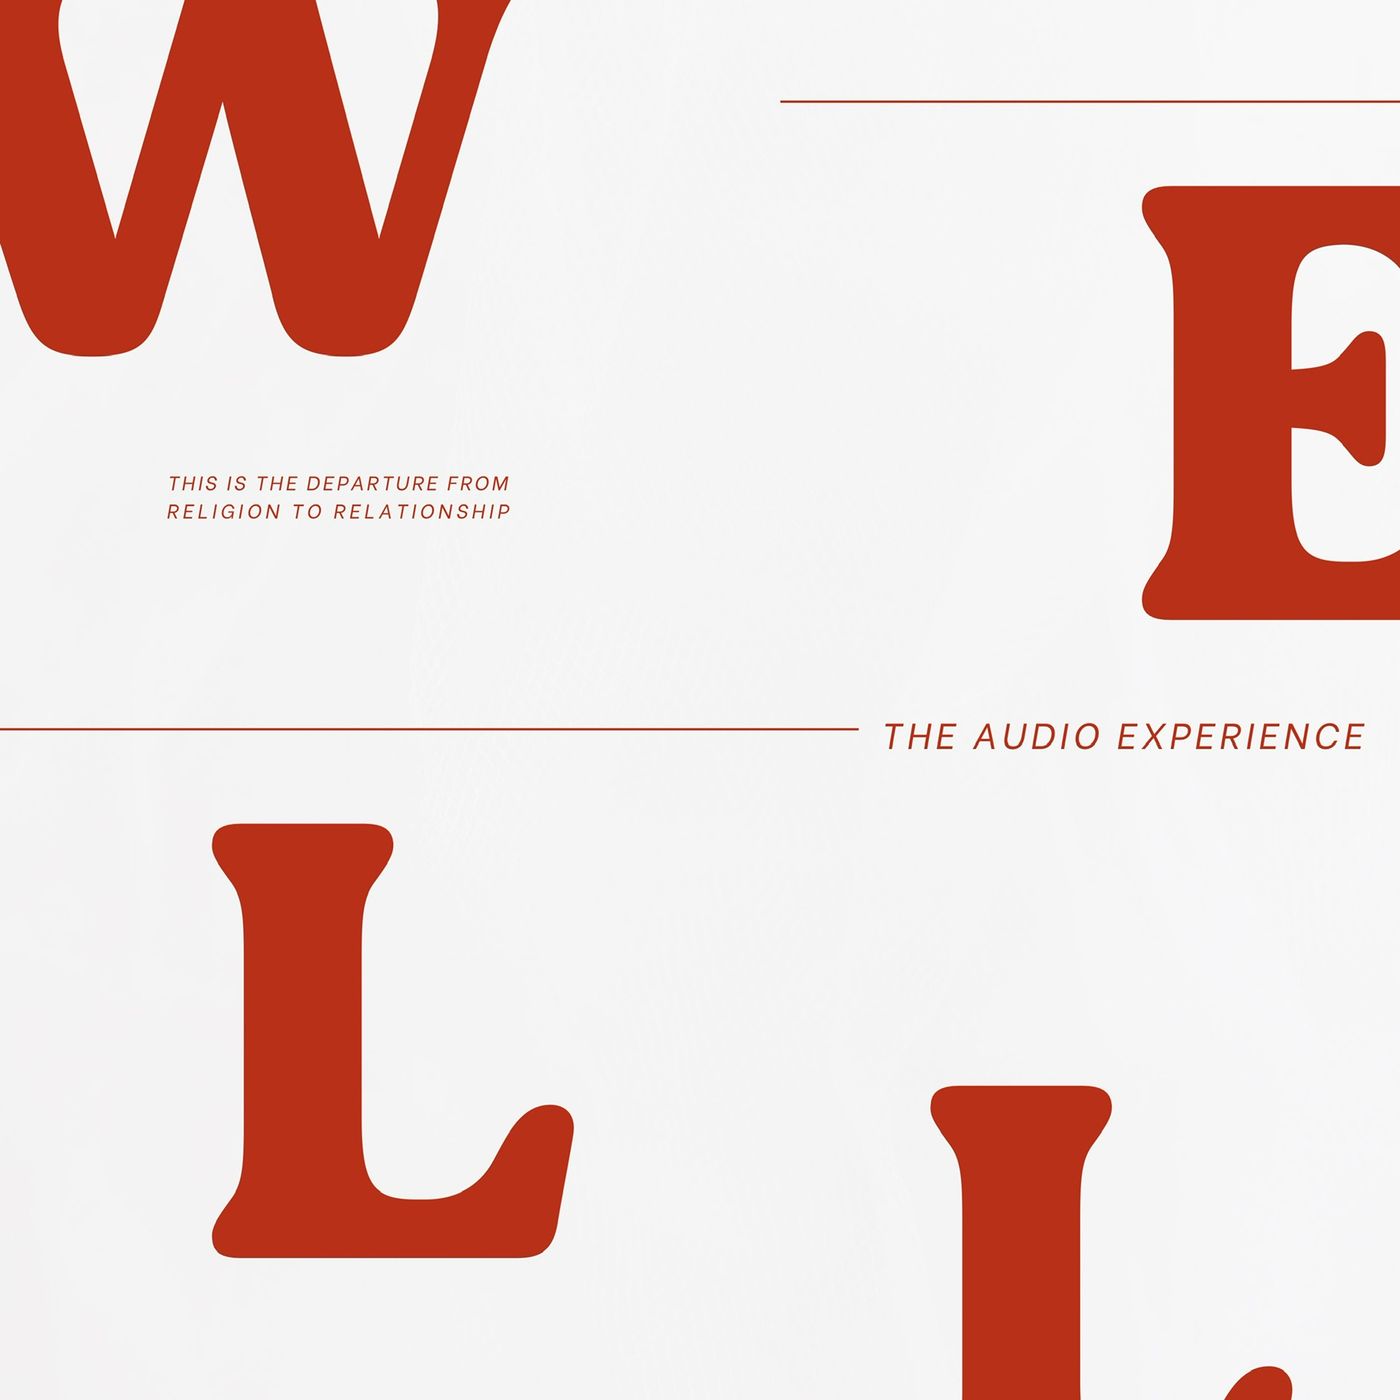 WELL: The Audio Experience